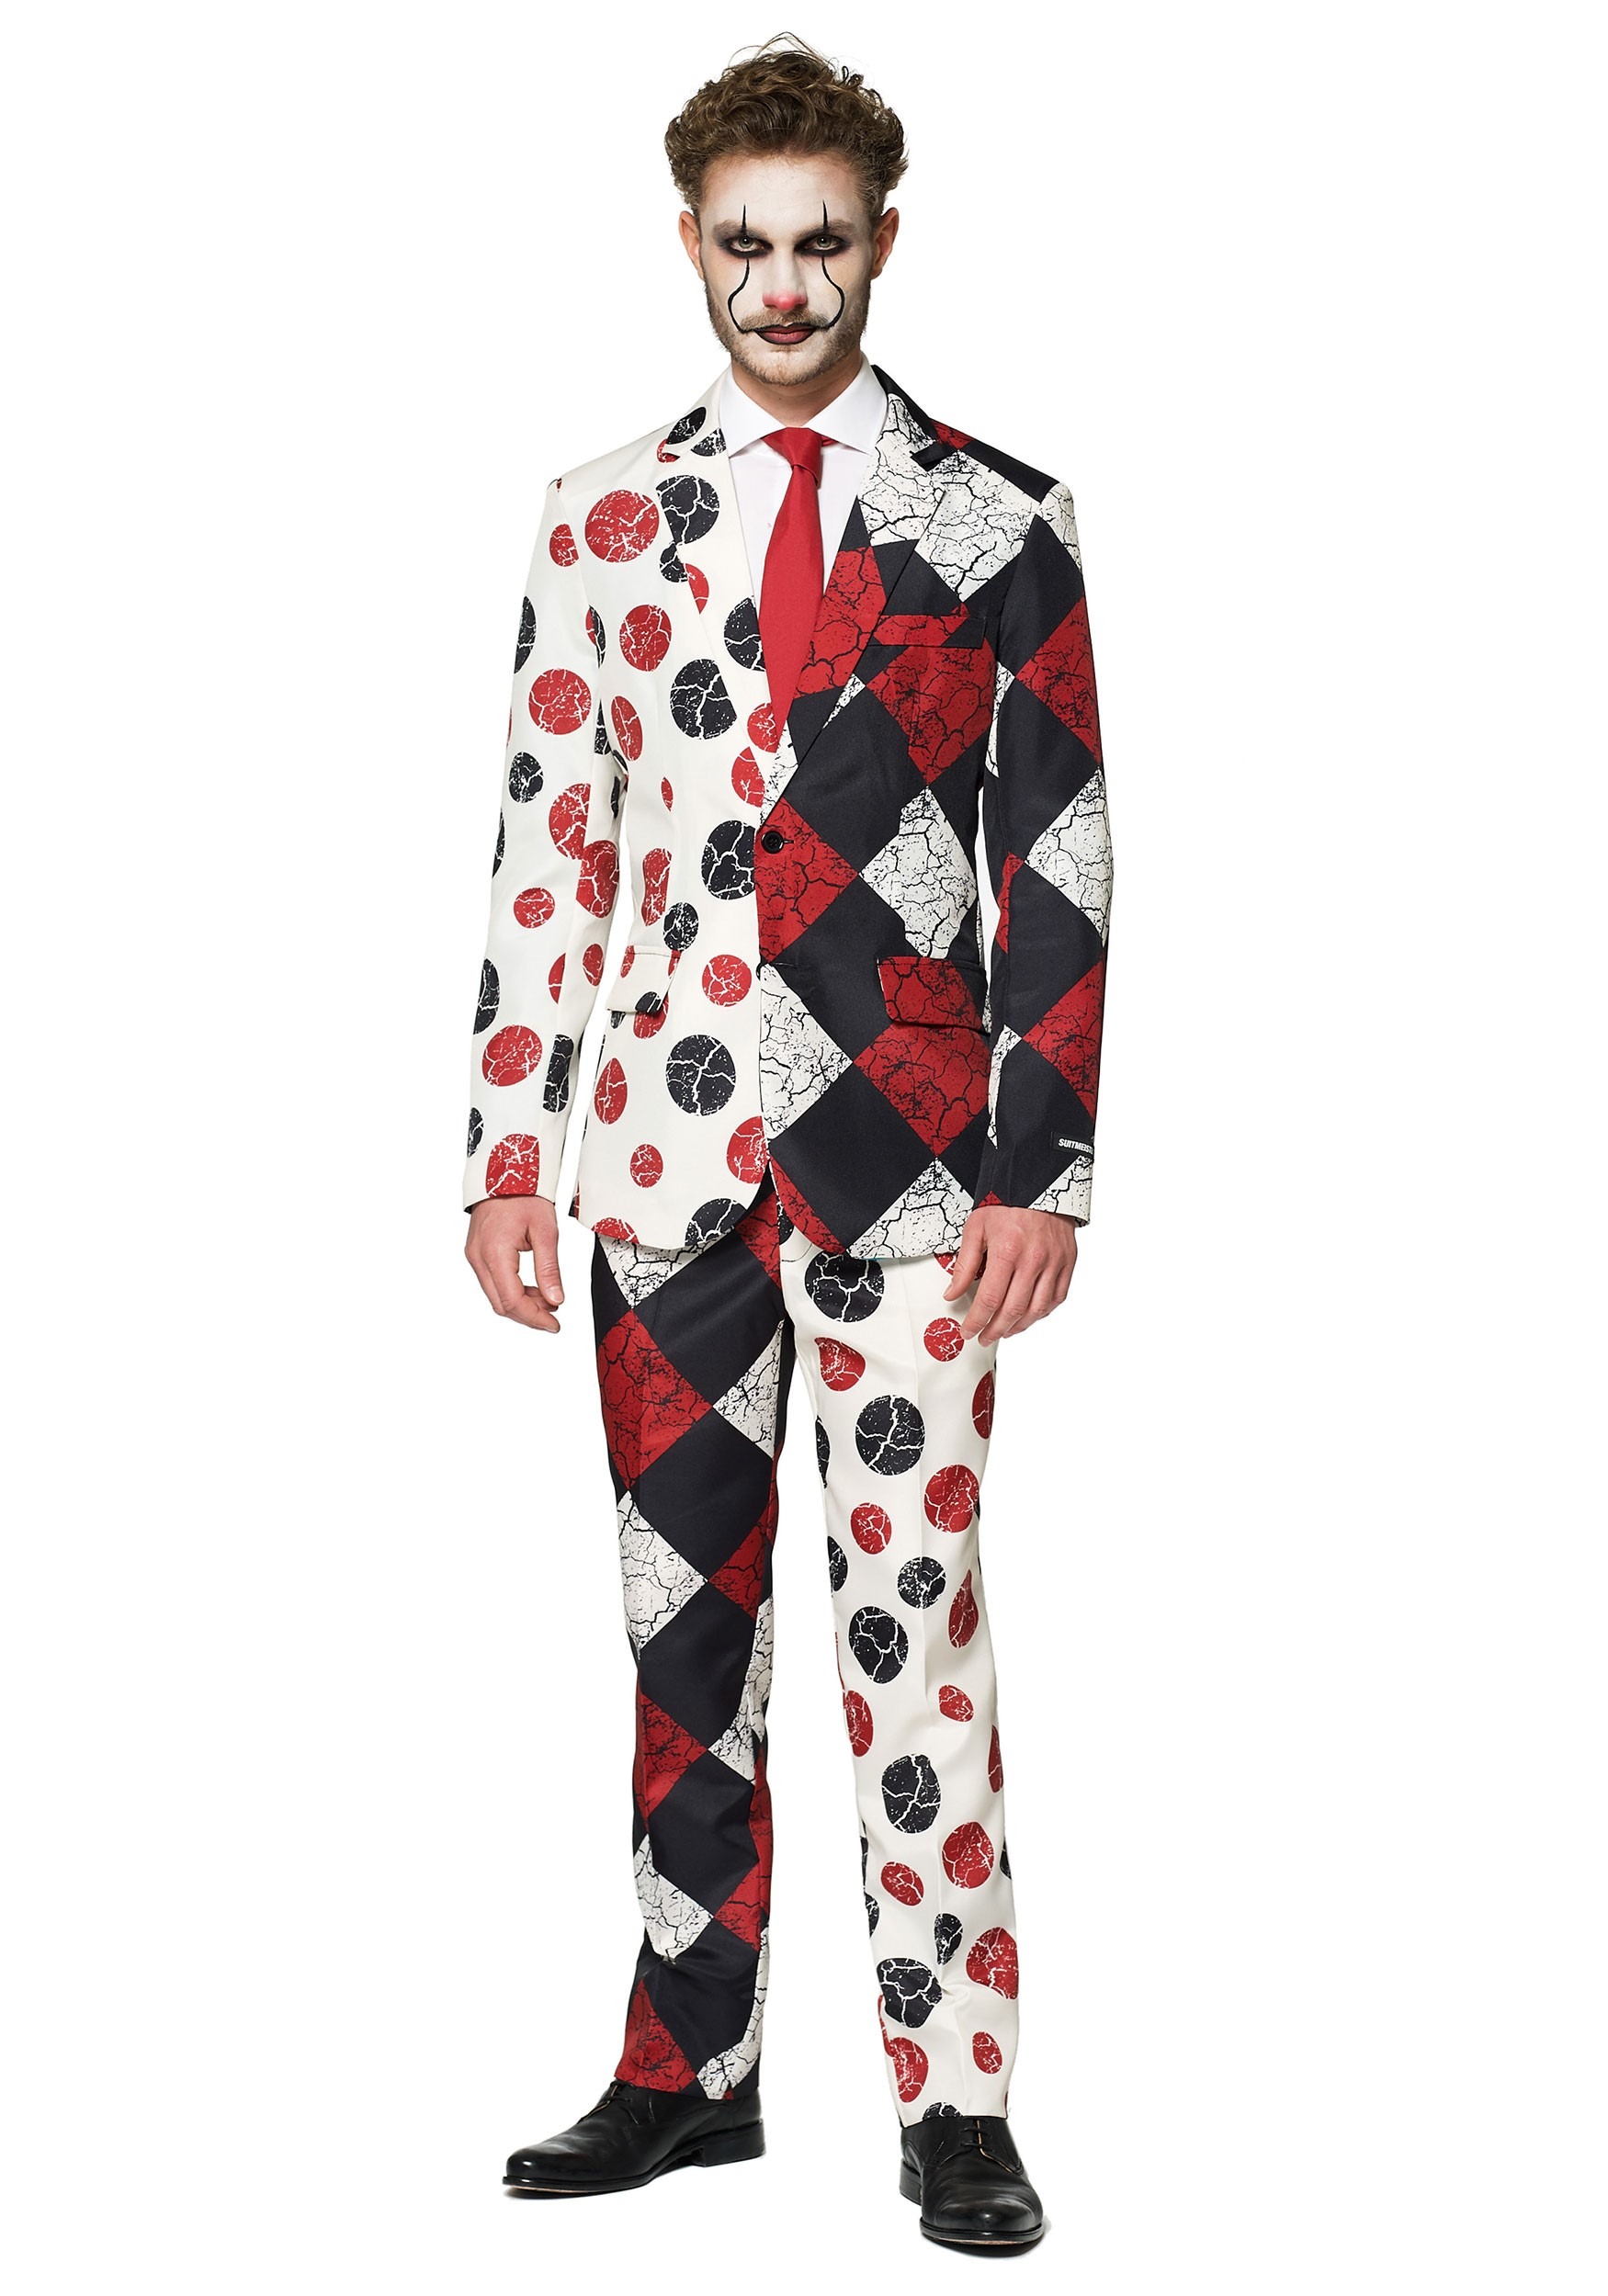 Image of Men's Clown Suitmeister Suit ID OSOBAS-0065-XL